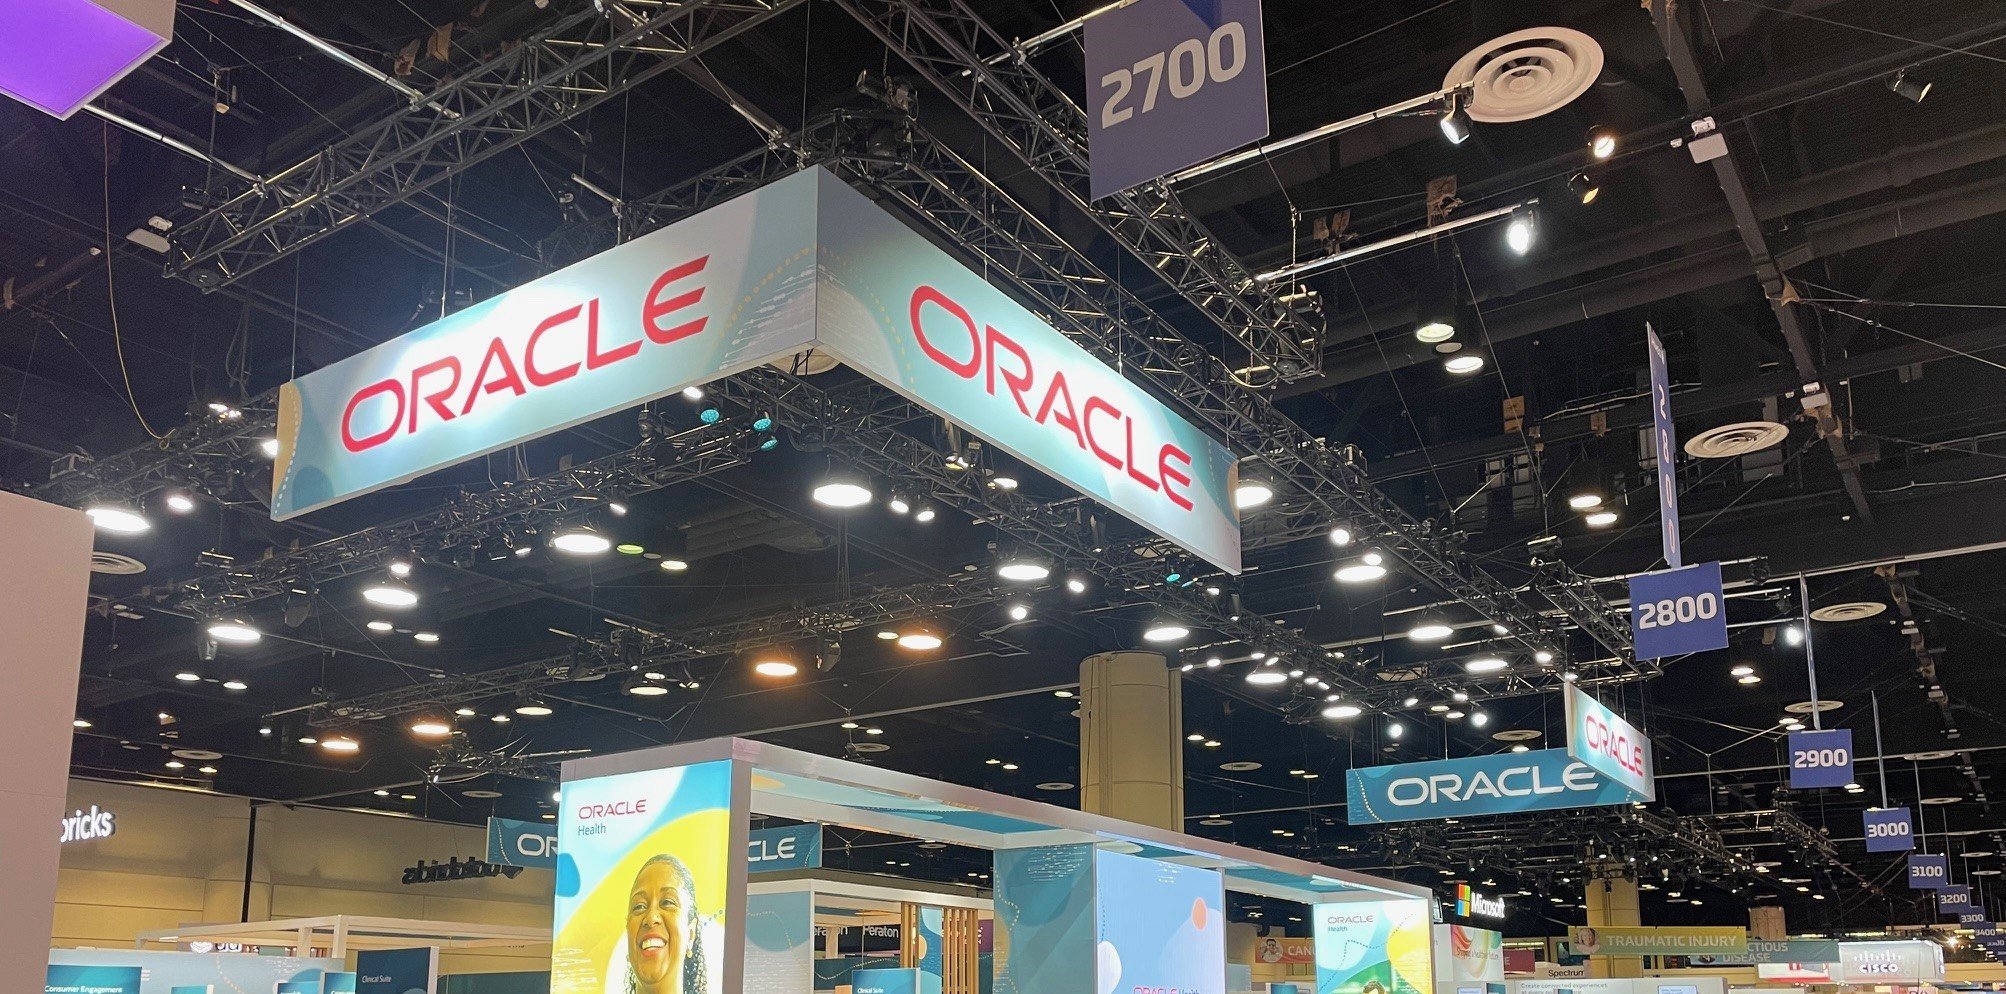 Oracle booth sign at HIMSS24 conference